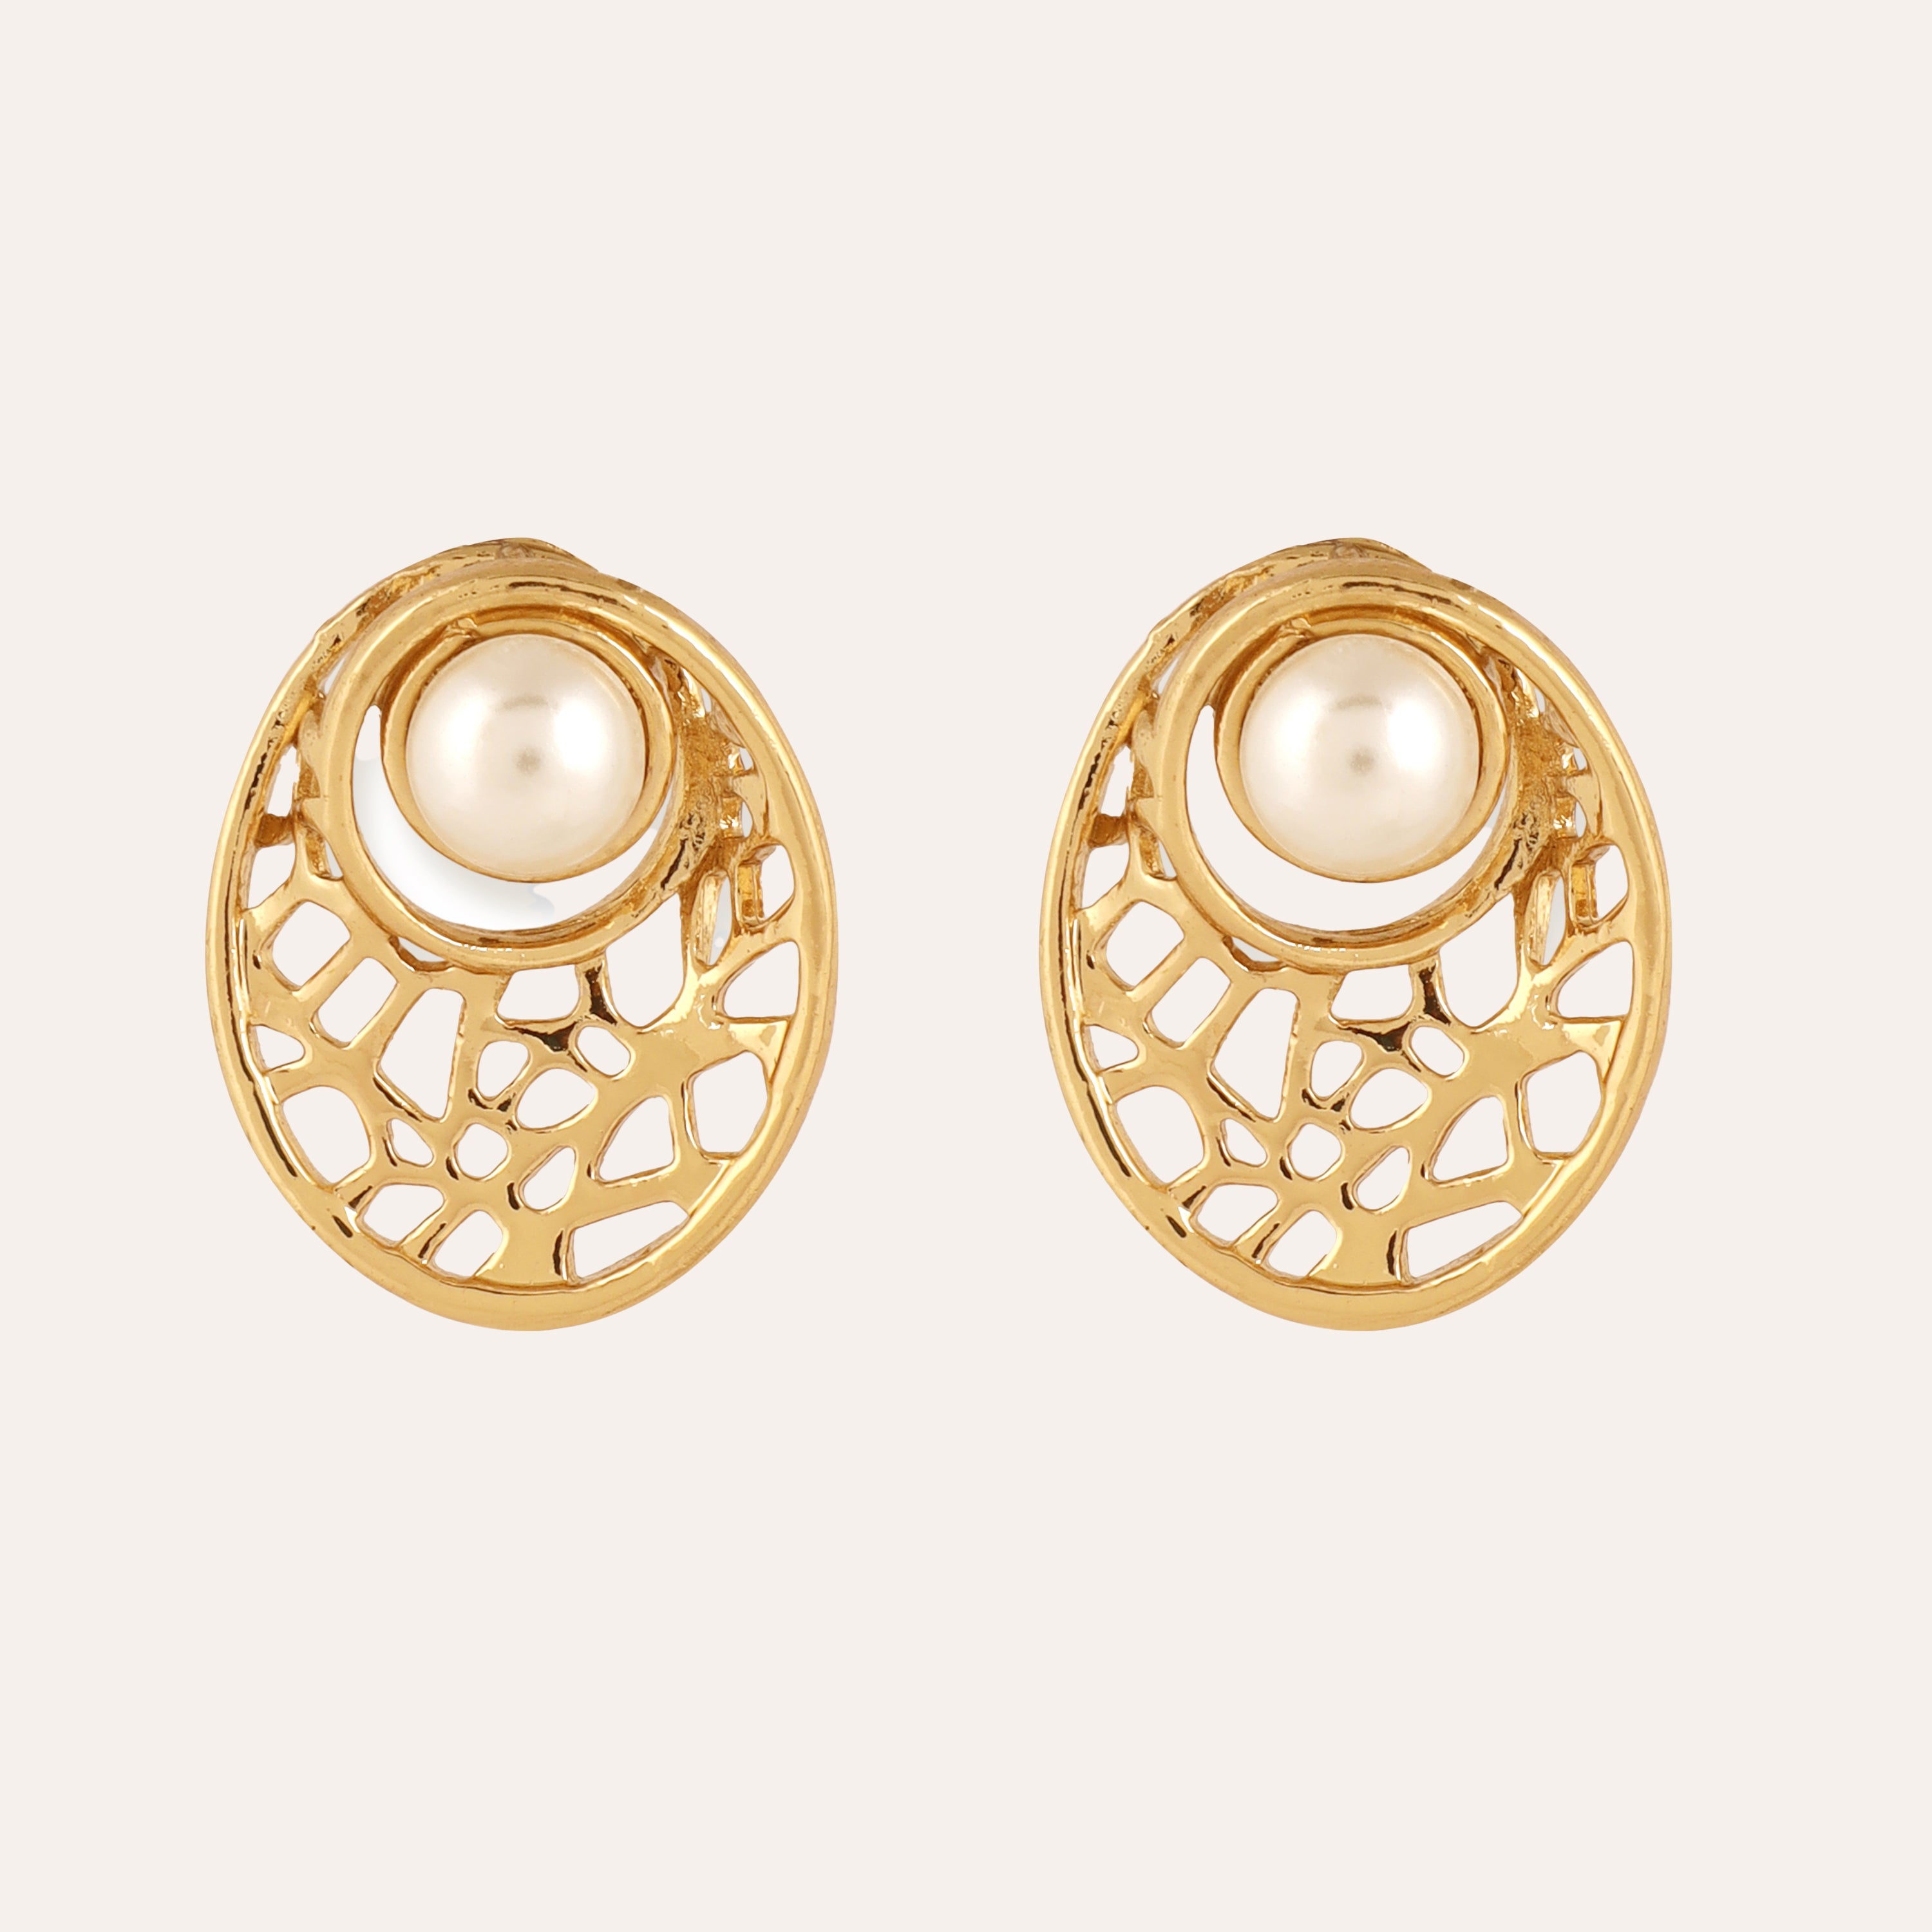 TFC Pearl Fantasia gold plated stud earrings-Discover daily wear gold earrings including stud earrings, hoop earrings, and pearl earrings, perfect as earrings for women and earrings for girls.Find the cheapest fashion jewellery which is anti-tarnis​h only at The Fun company.